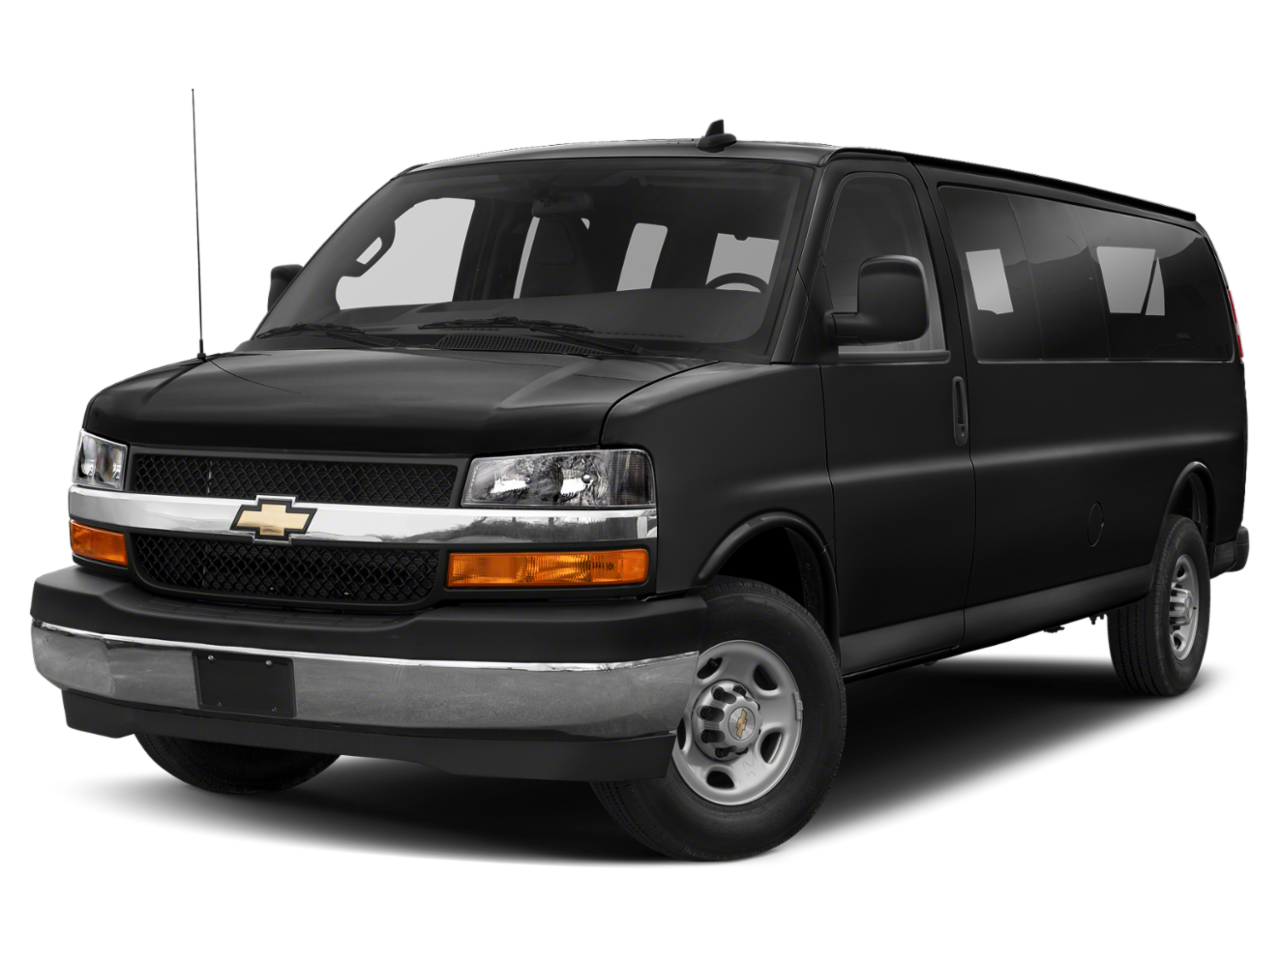 Chevrolet Express 3500 Repair: Service and Maintenance Cost